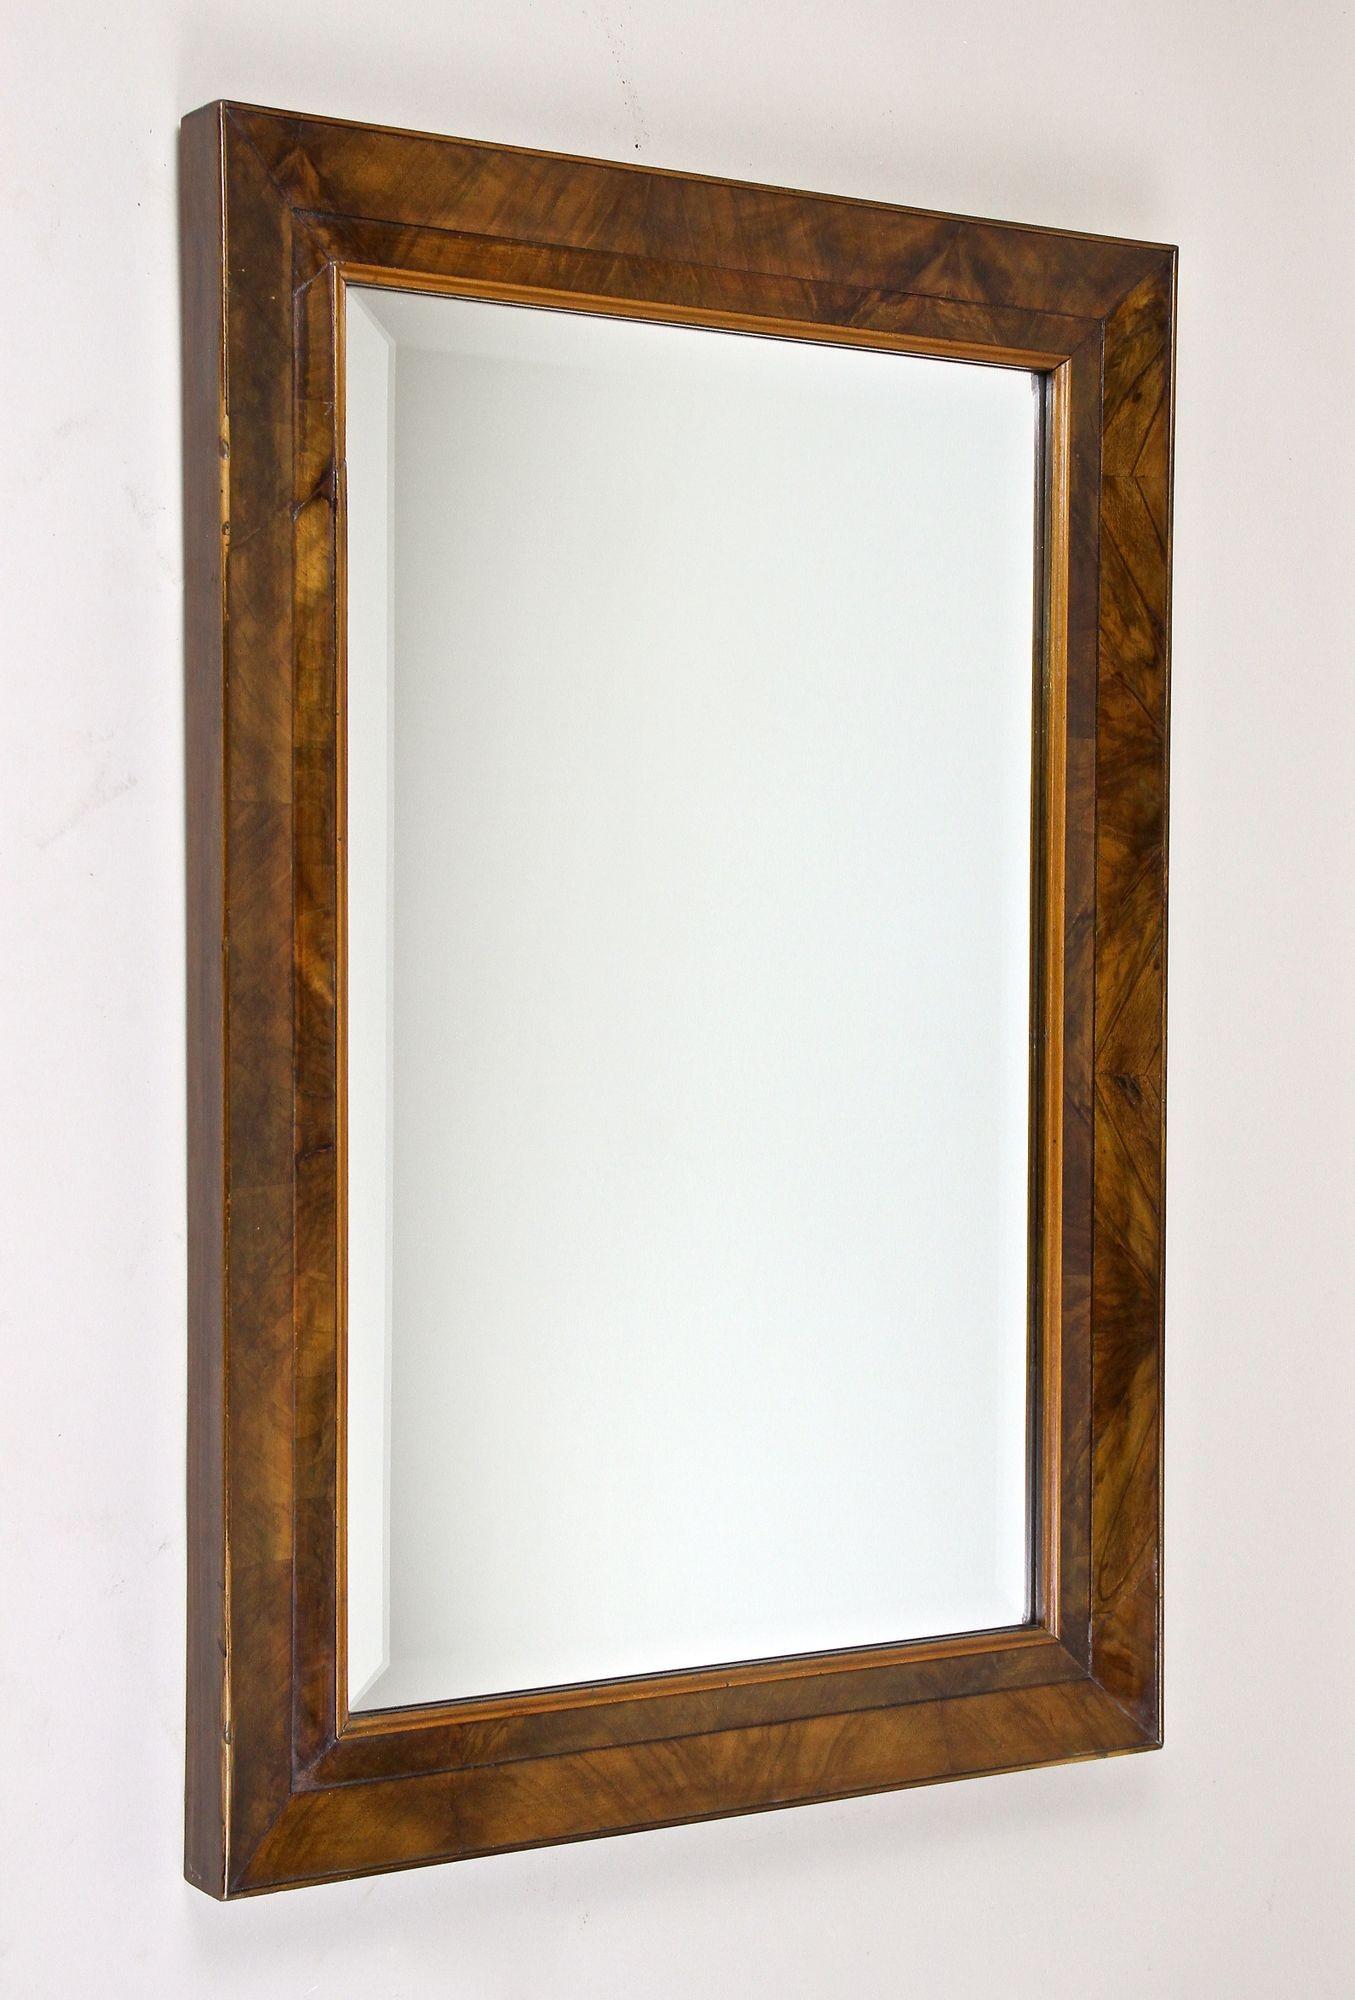 Beautiful Austrian Biedermeier nutwood wall mirror with facet cut mirror from the early period in Vienna around 1830. This lovely 19th century wall mirror shows a classical substructure made of spruce wood, veneered with fine nut wood and sealed